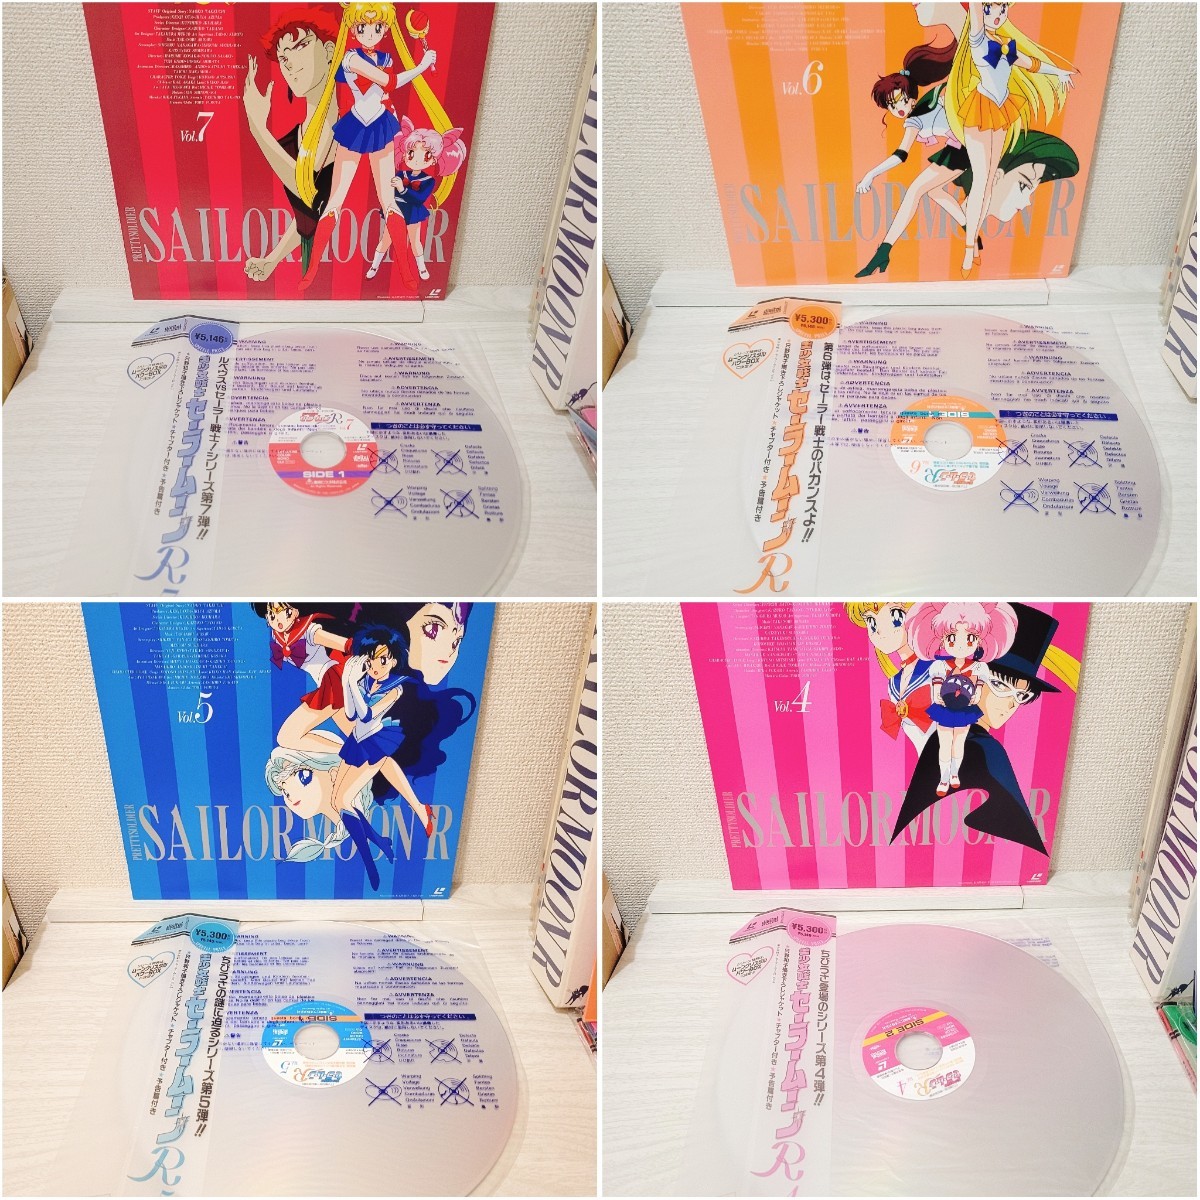  Pretty Soldier Sailor Moon R TV version LD BOX( exclusive use BOX attaching ) laser disk 11 sheets Sailor Moon Laserdisc laser disc anime set summarize 